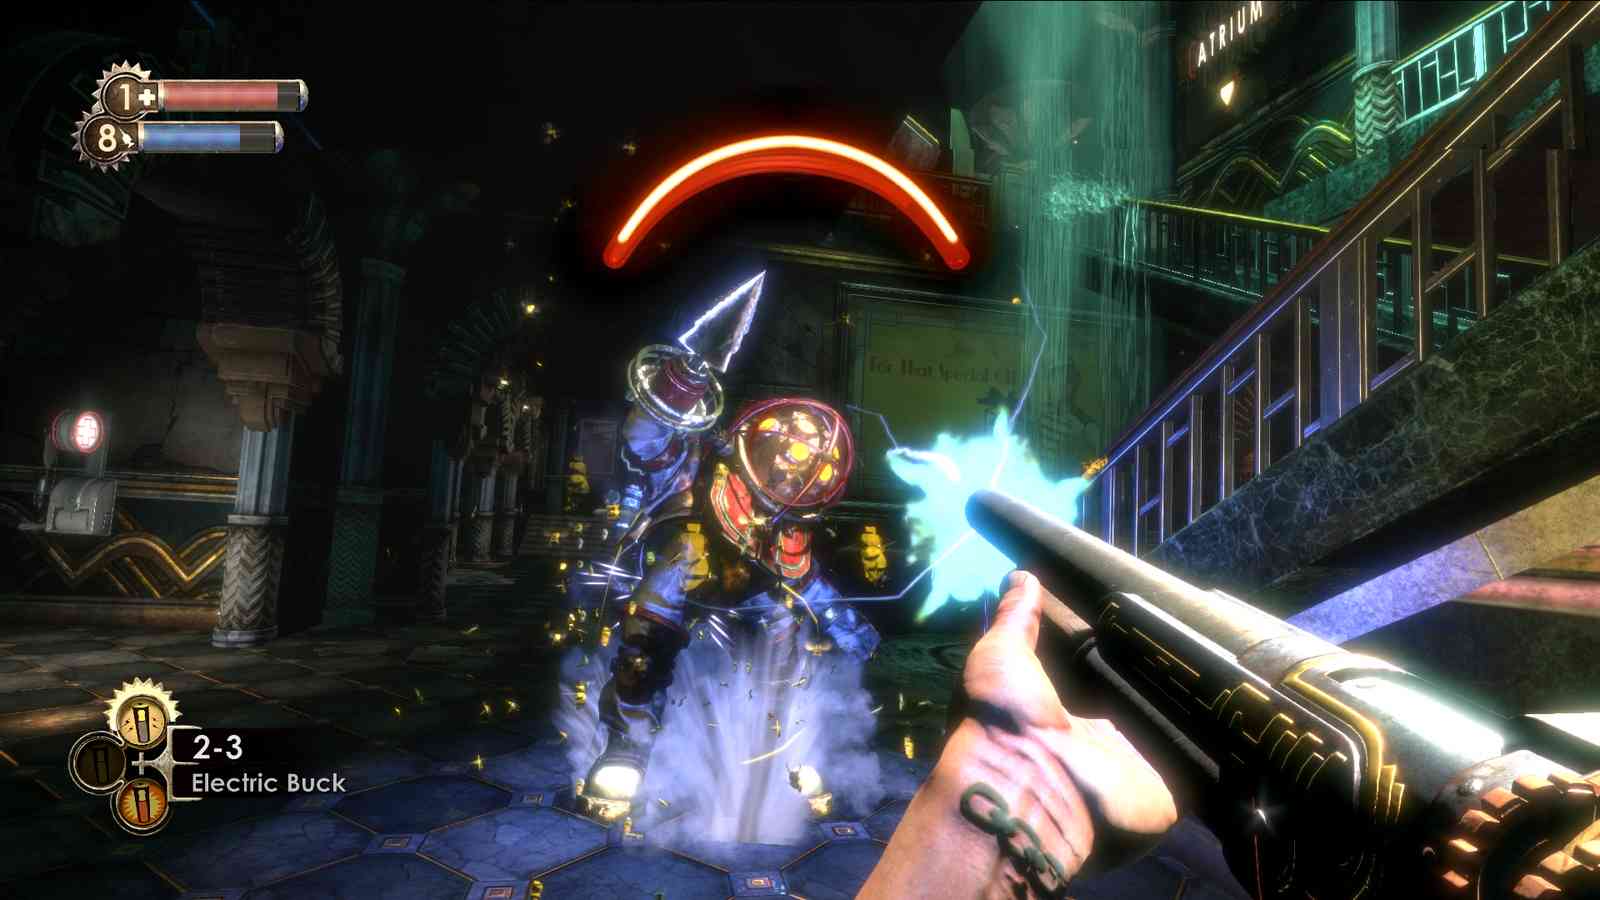 bioshock the collection pc update